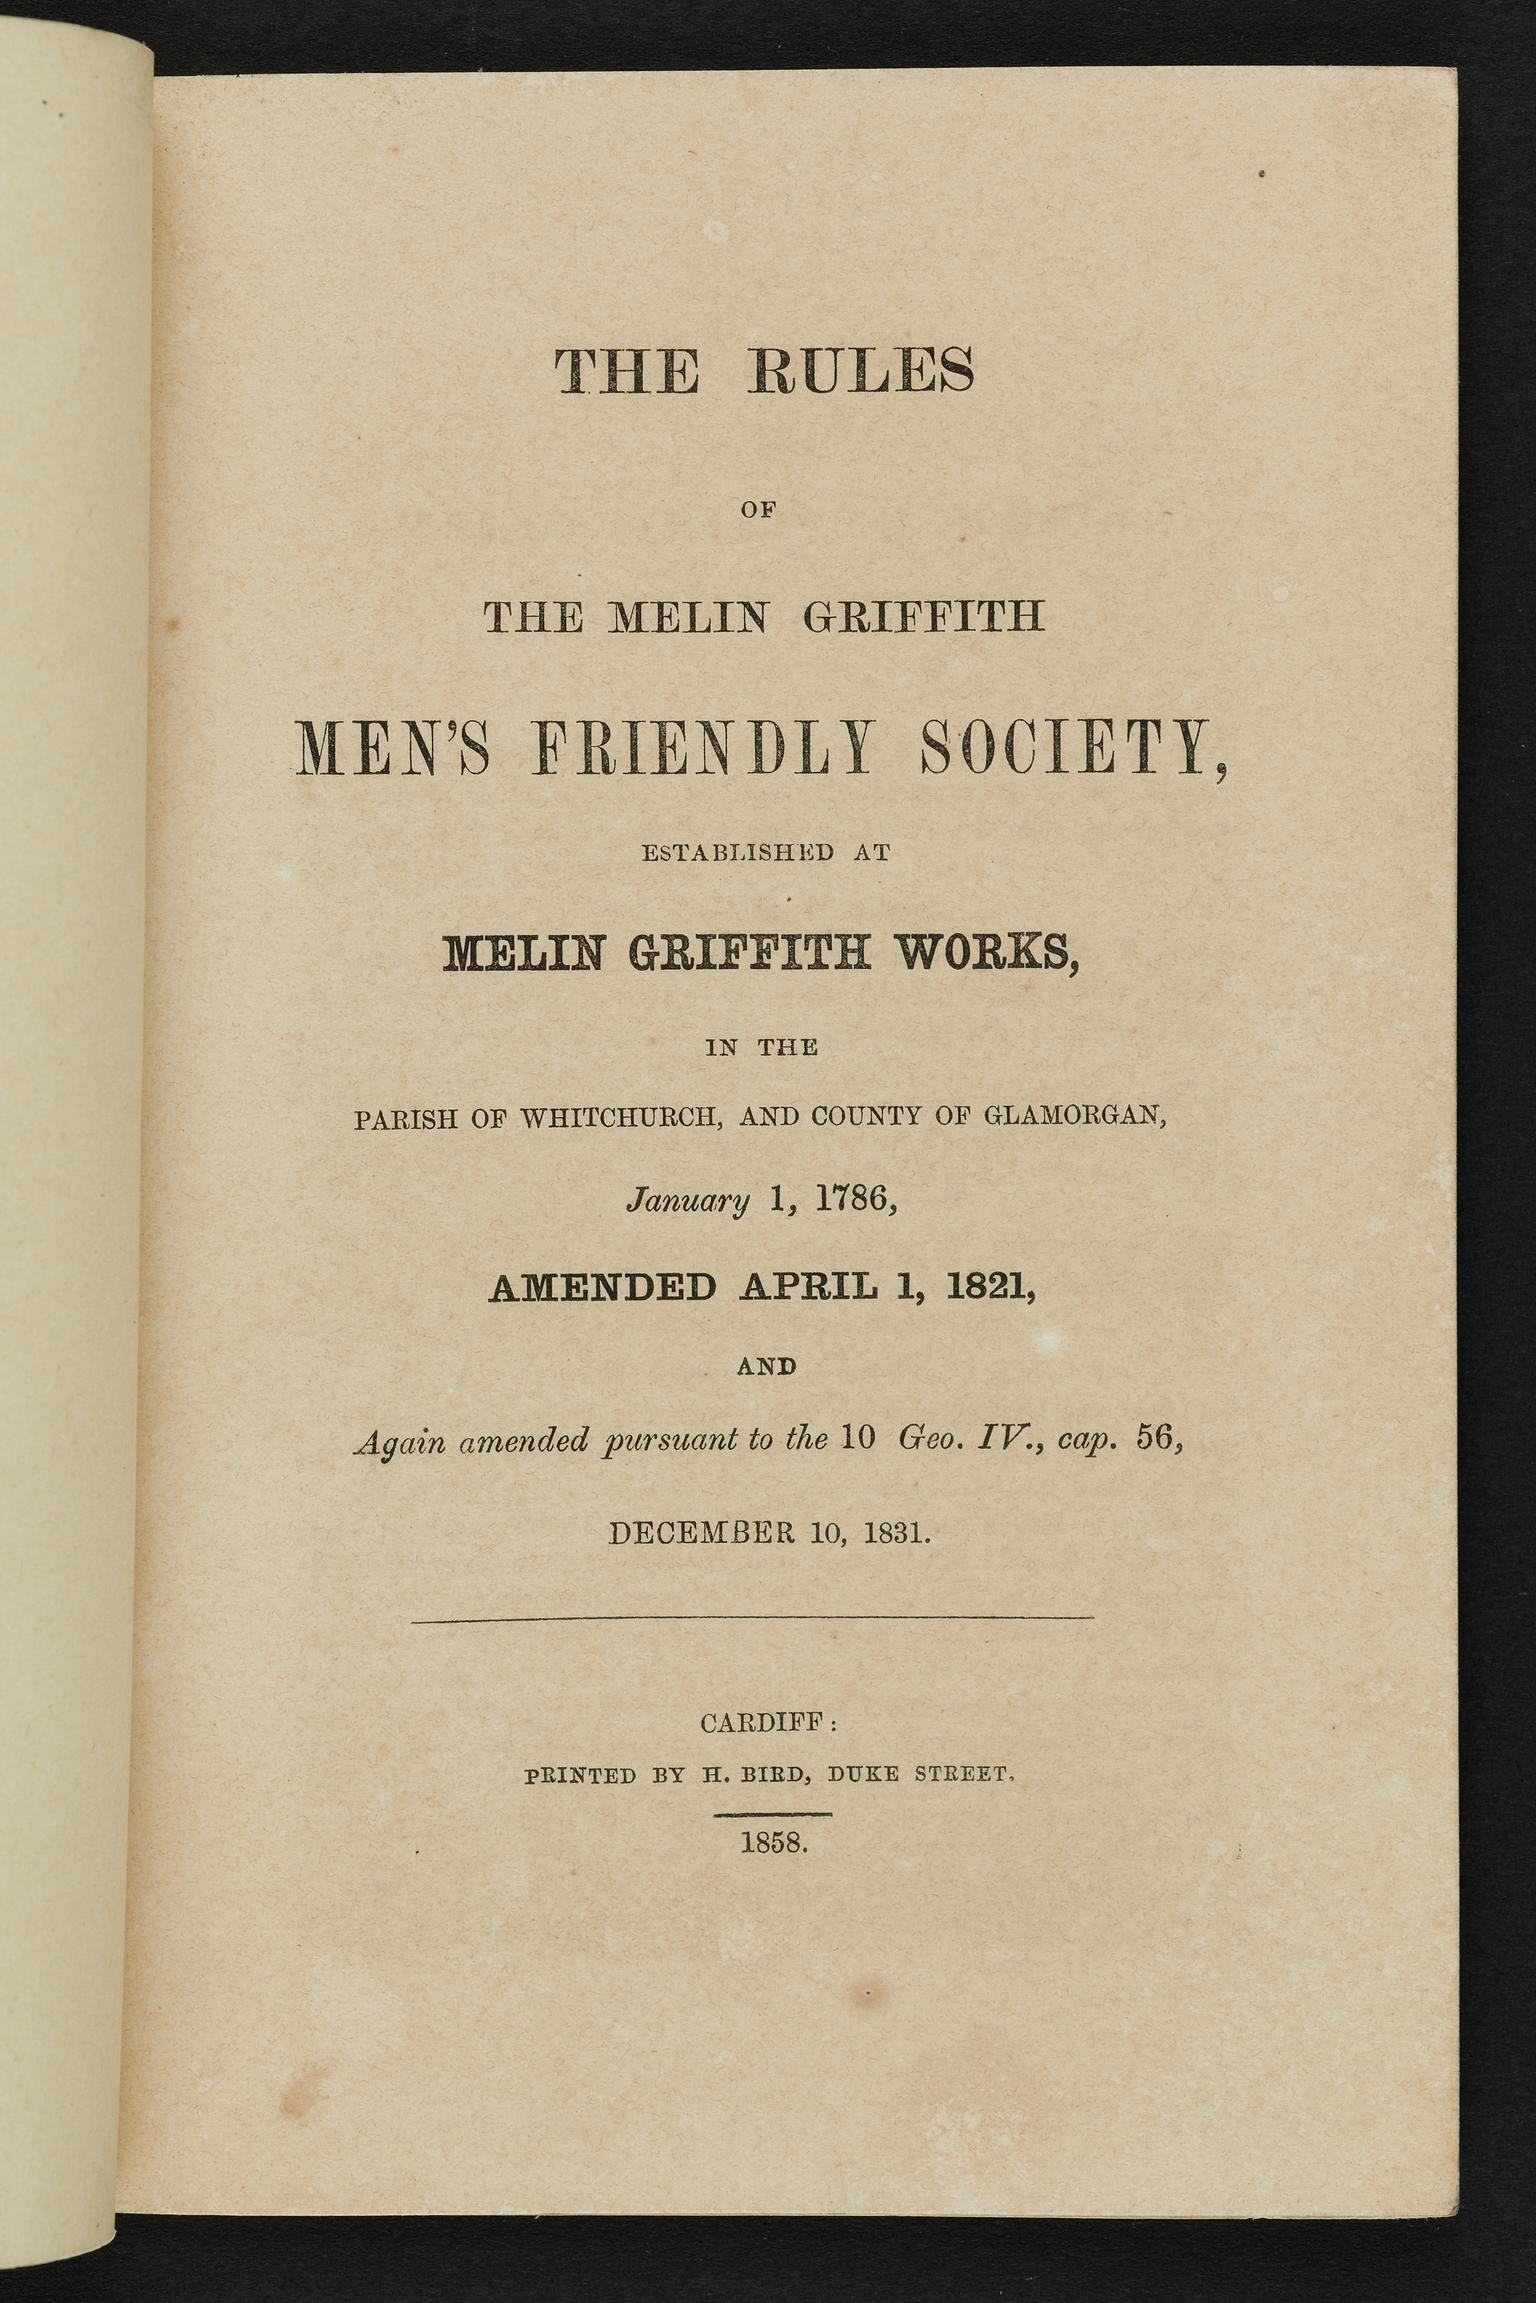 The Rules of the Melin Griffith Men's Friendly Society, Established at Melin Griffith Works (rule book)